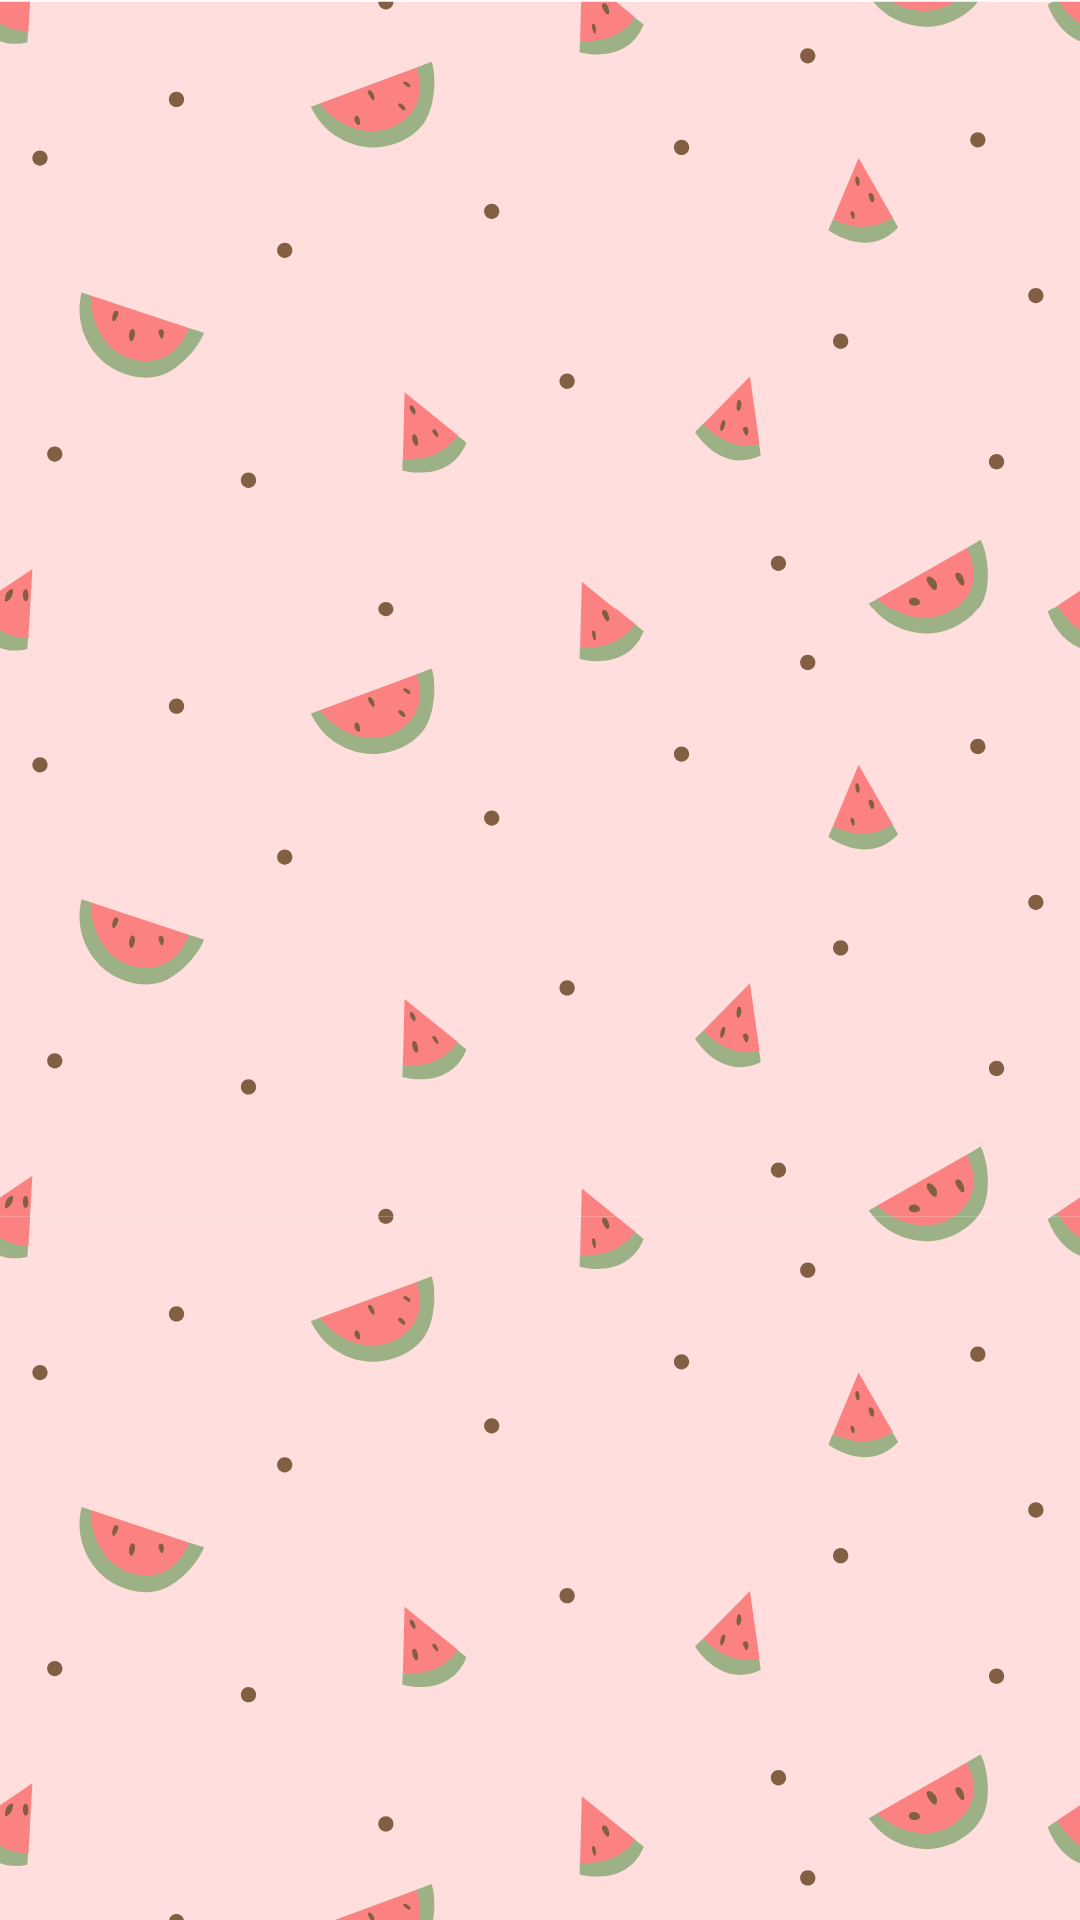 Cute Red Watermelon Slice Design On Stock Vector Royalty Free 353568869   Shutterstock